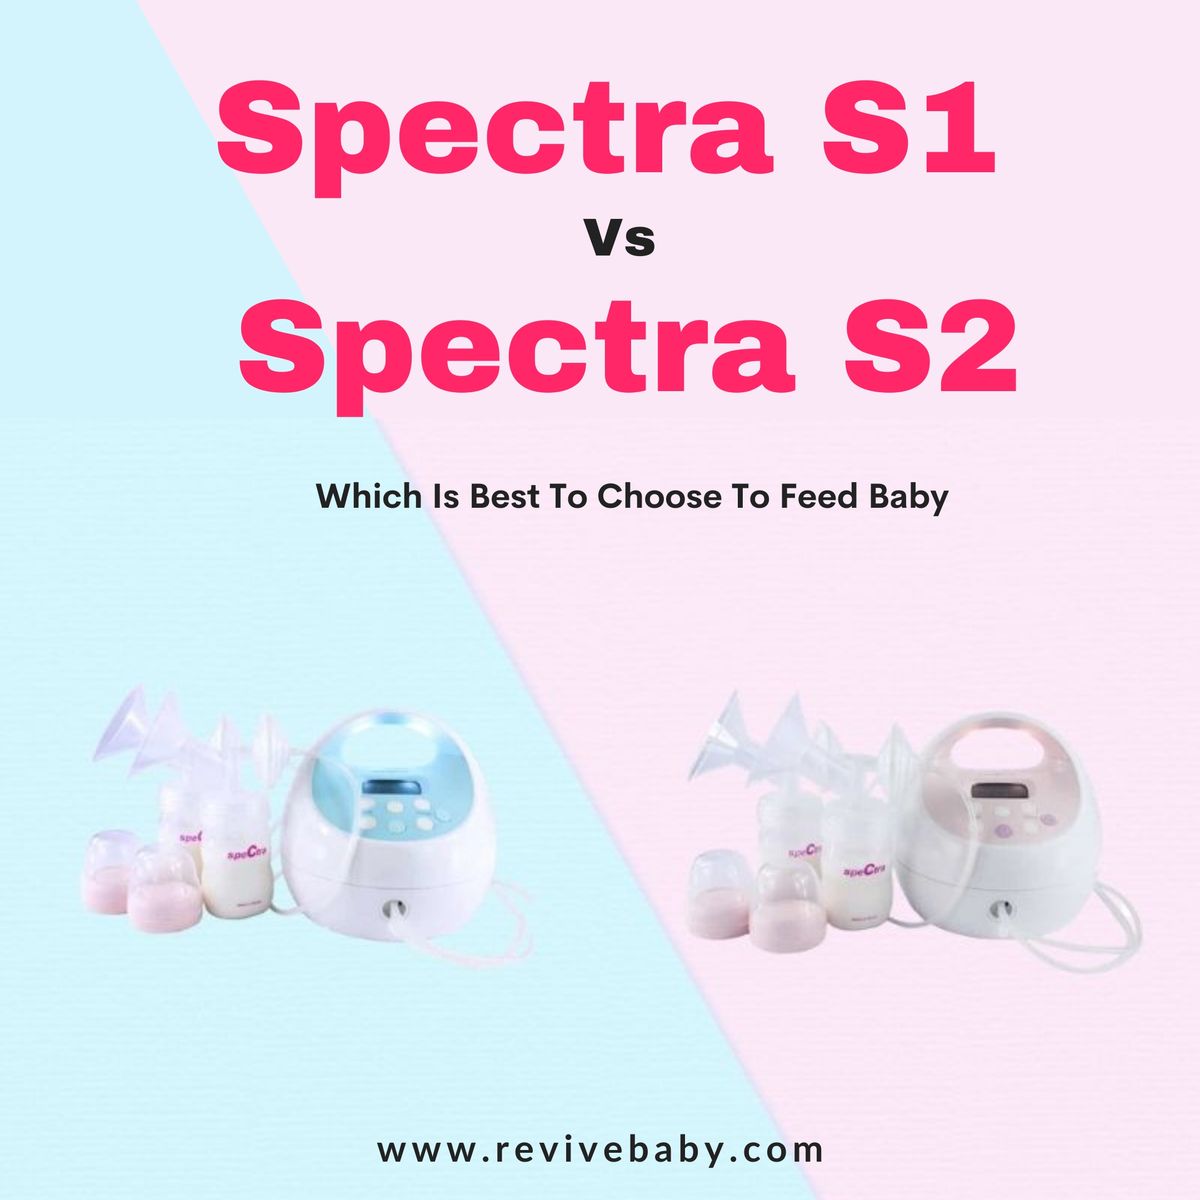 Spectra S1 Vs S2 - Which Is Best To Choose To Feed Baby